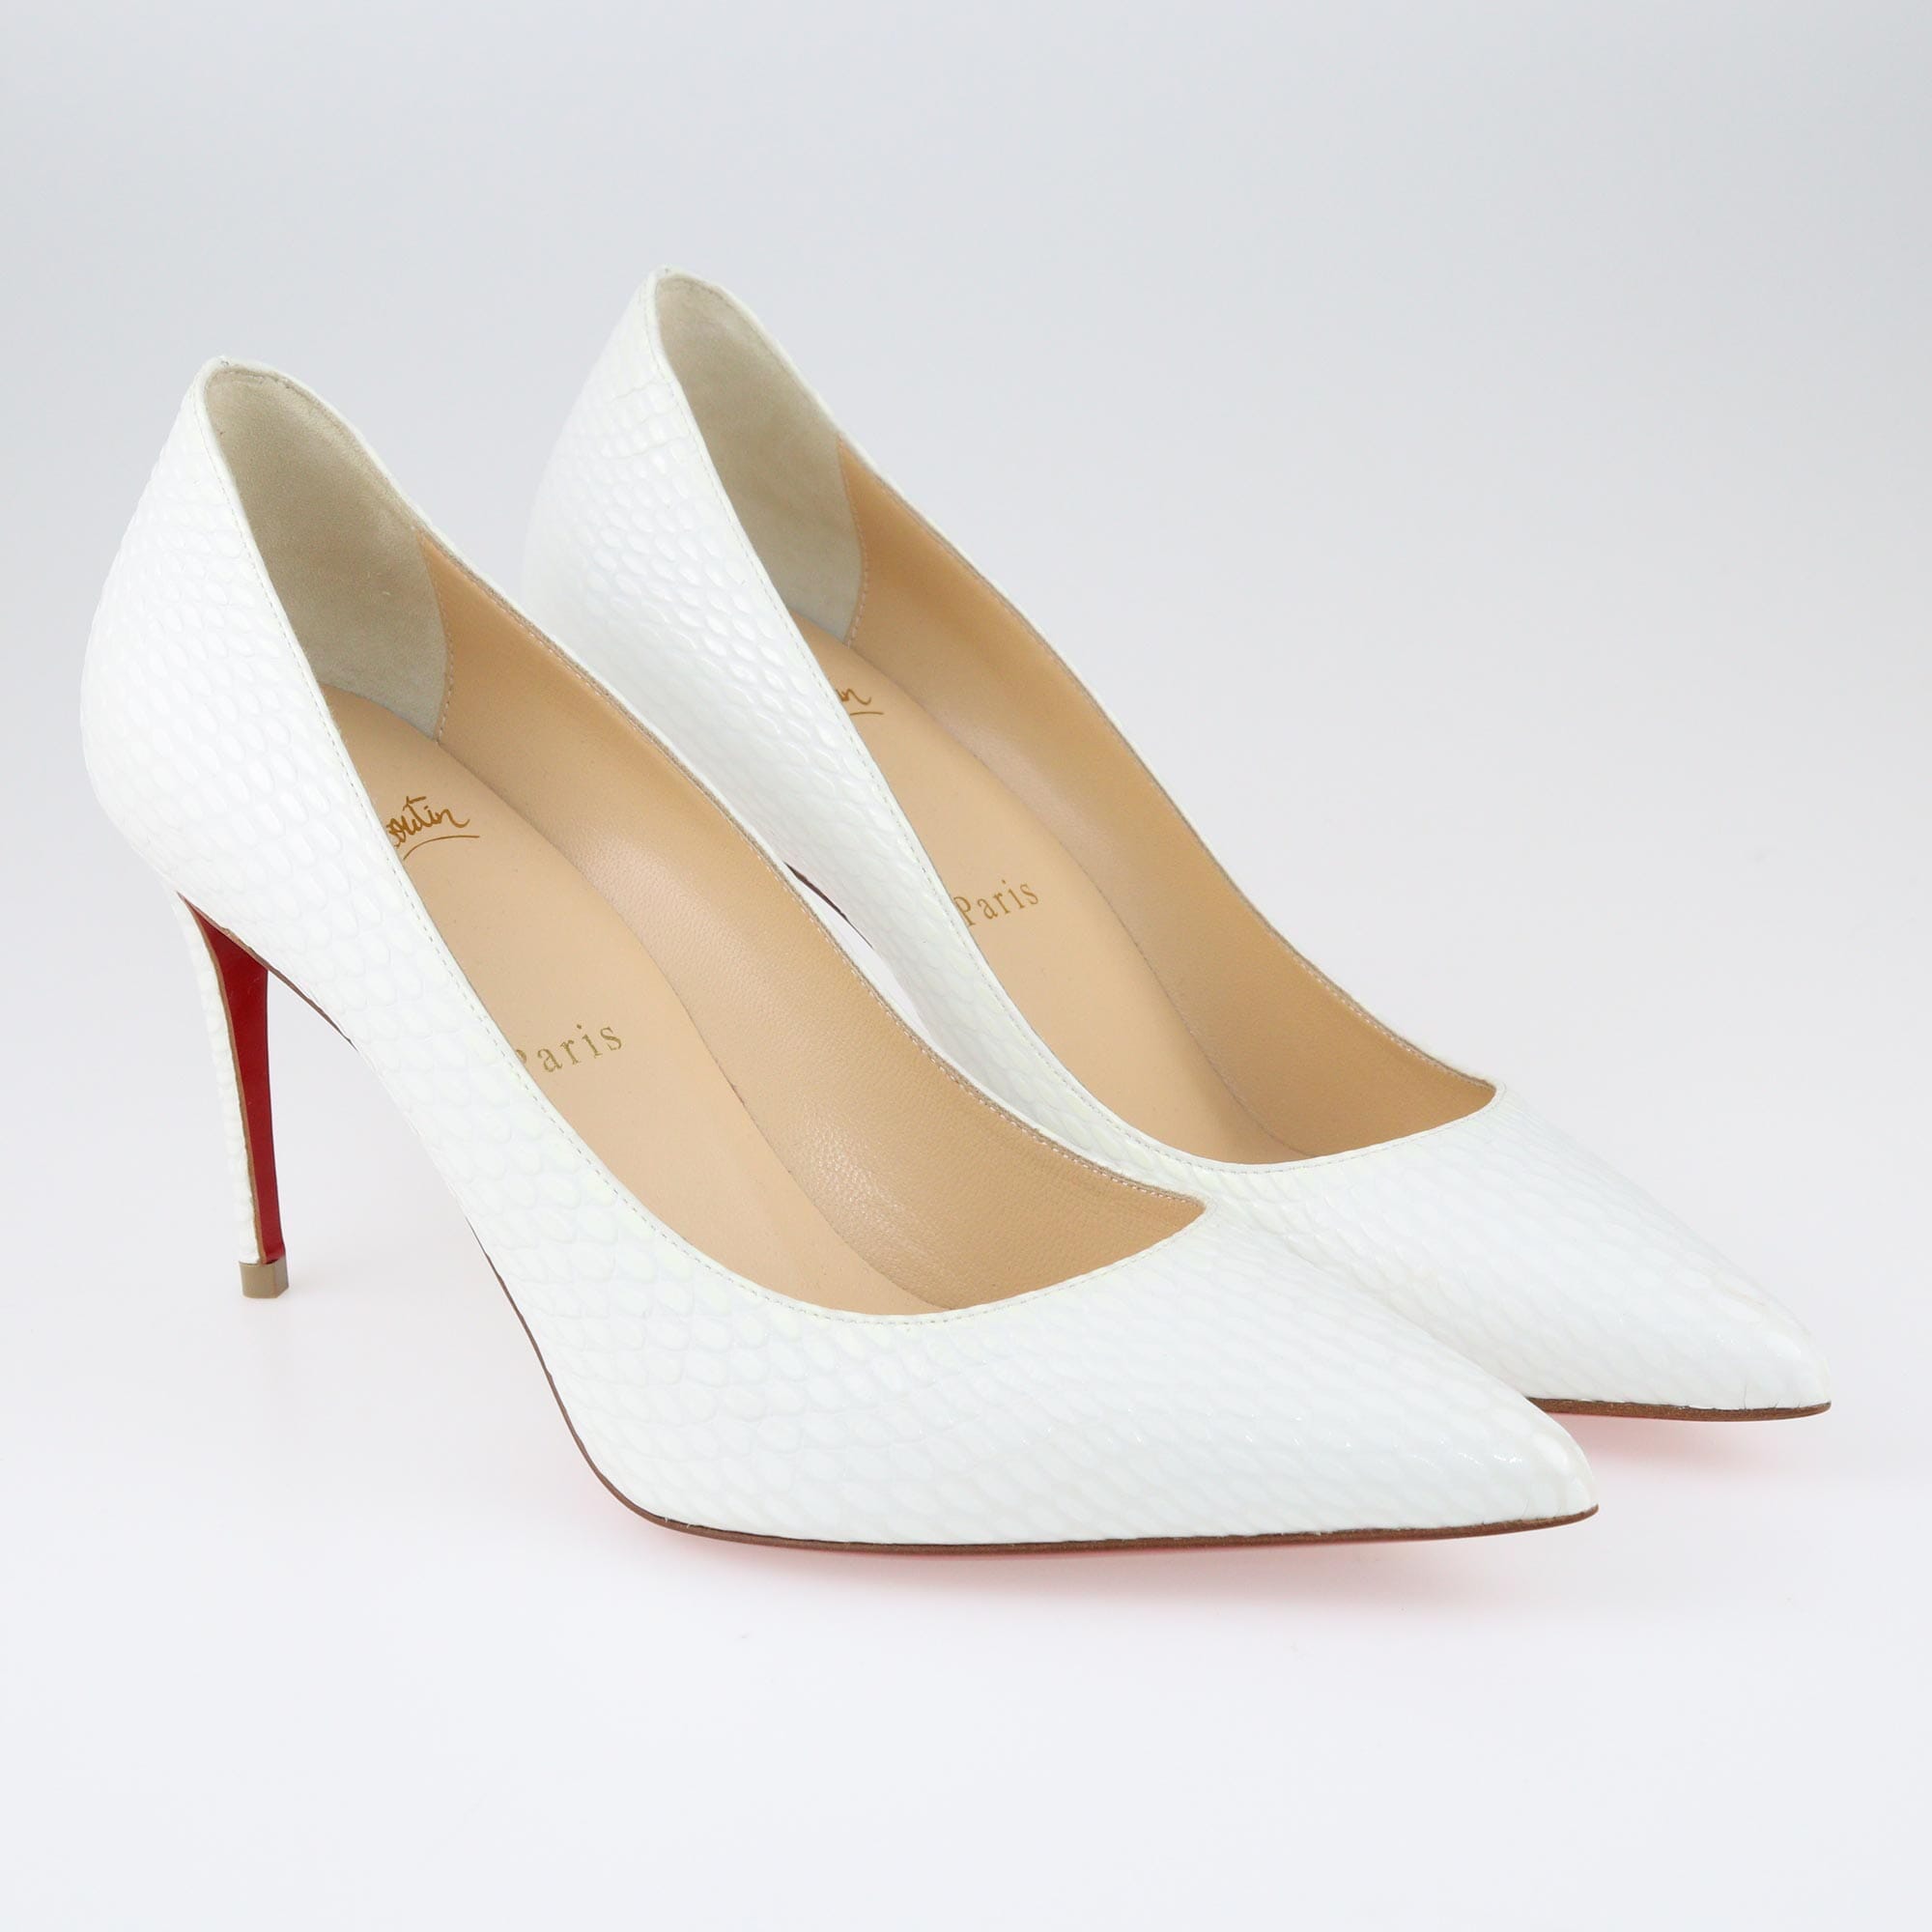 Christian Louboutin White Embossed Pointed ToePumps Shoes Christian Louboutin 